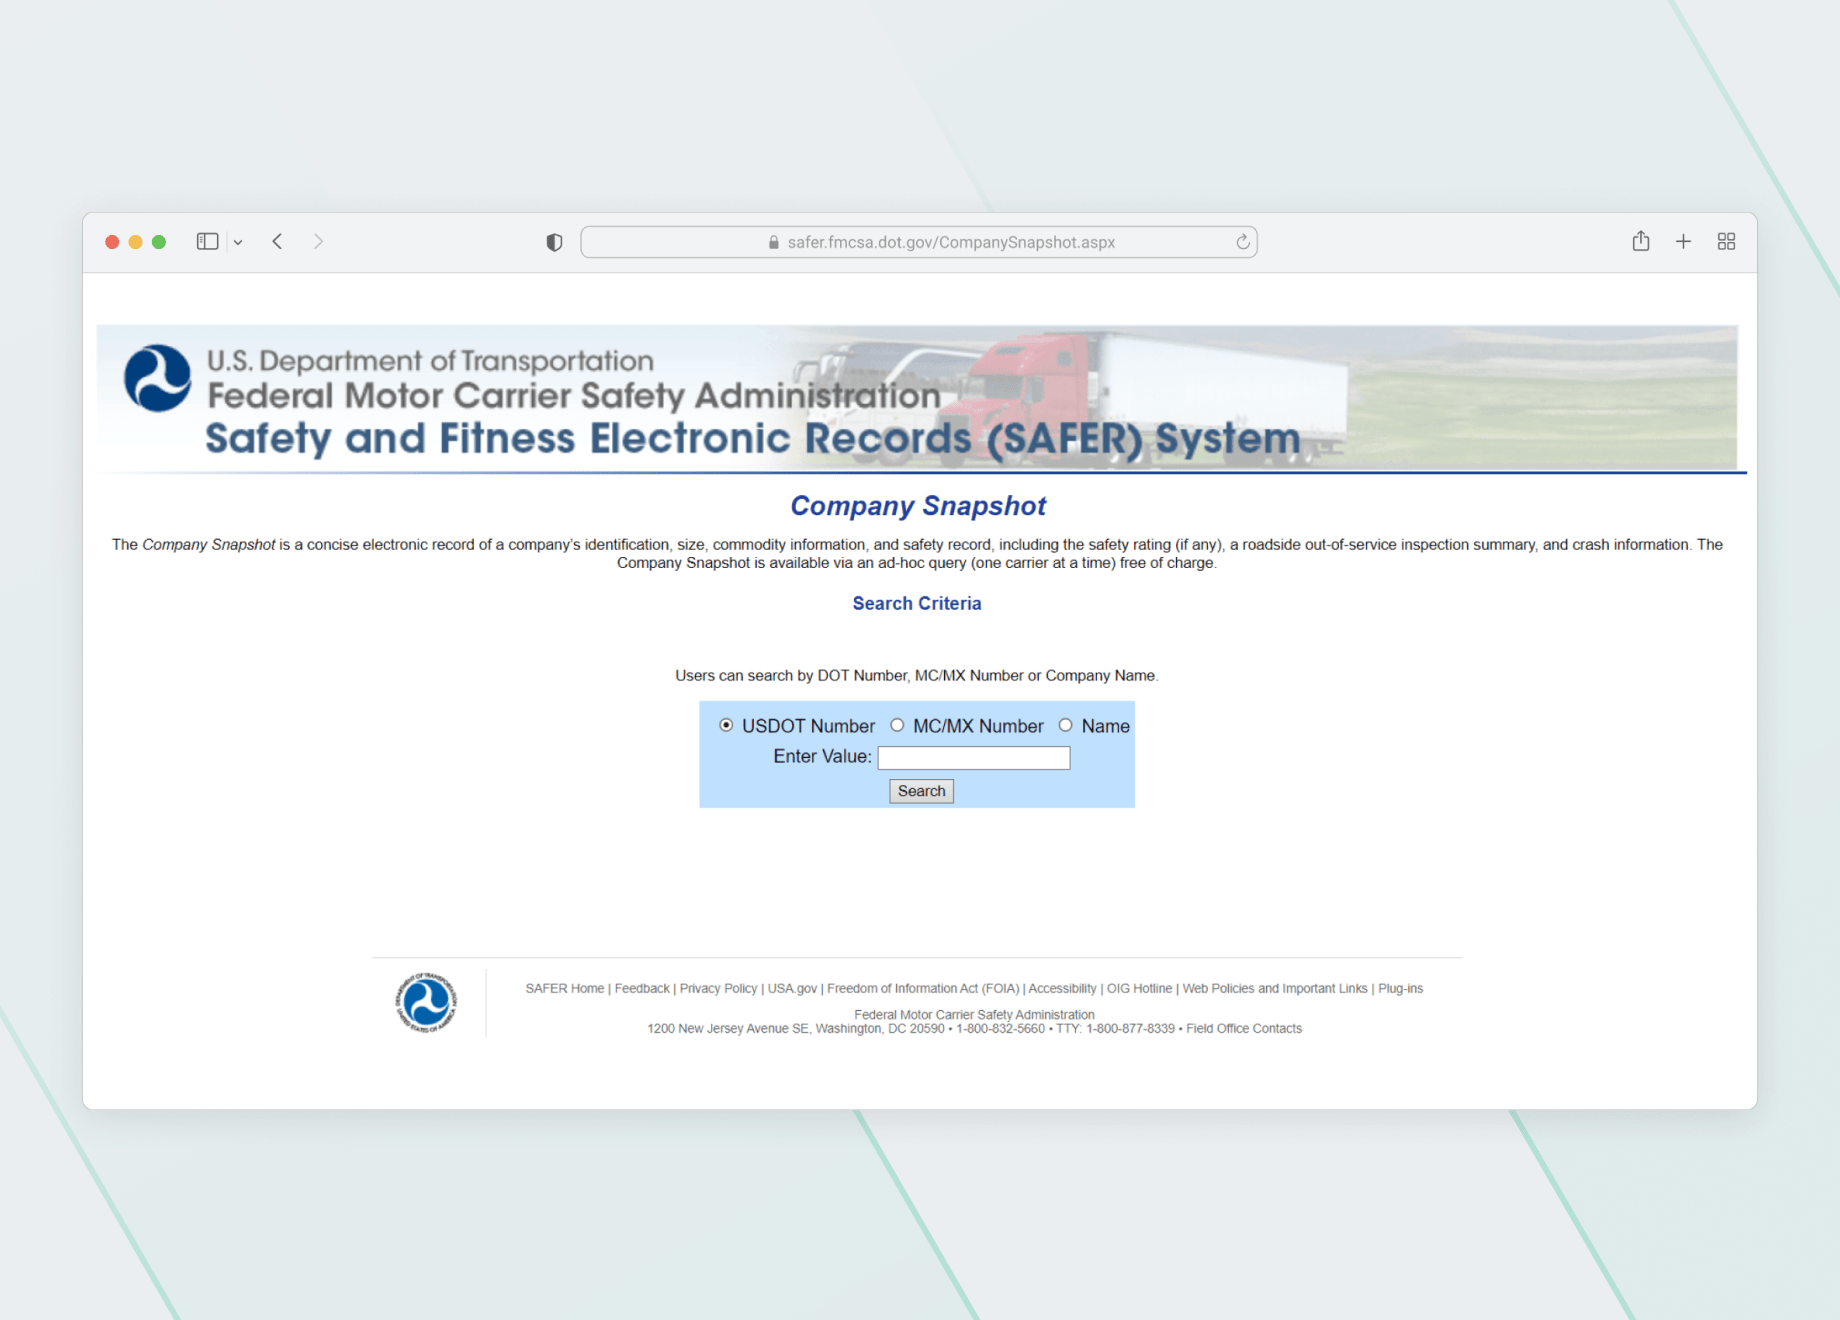 Fitness Electronic Records (SAFER) System